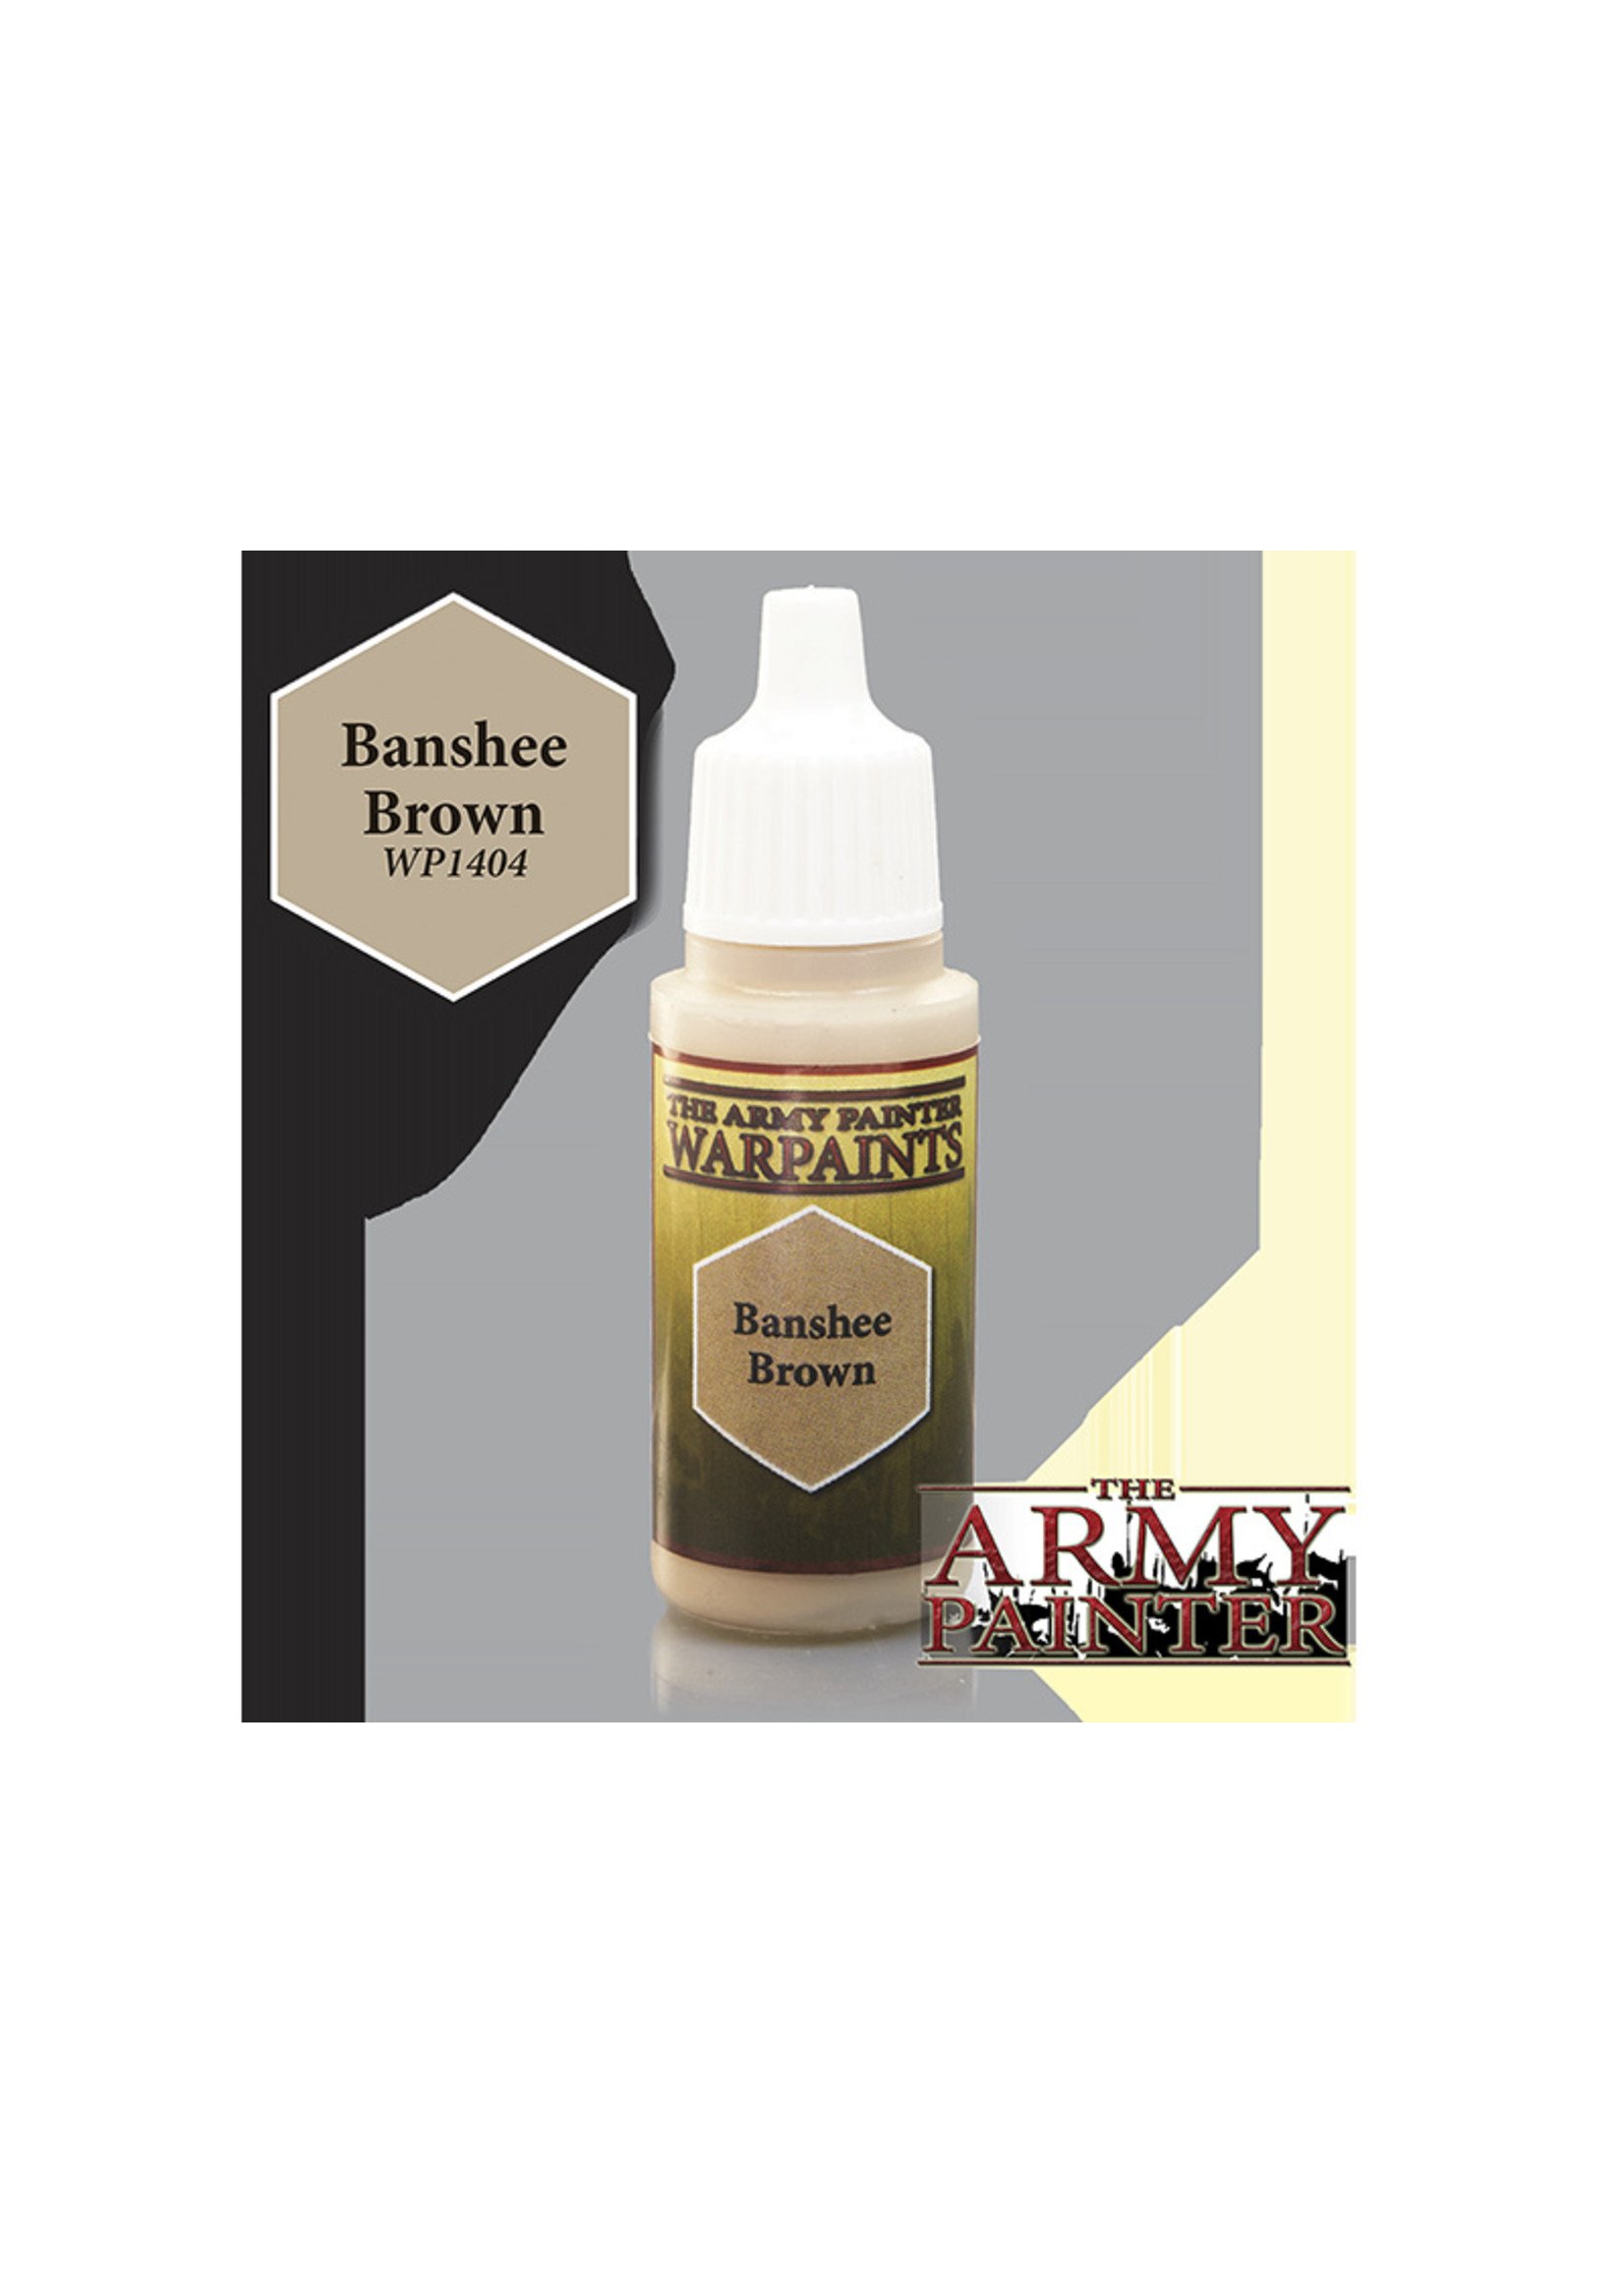 The Army Painter Acrylics Warpaints Banshee Brown